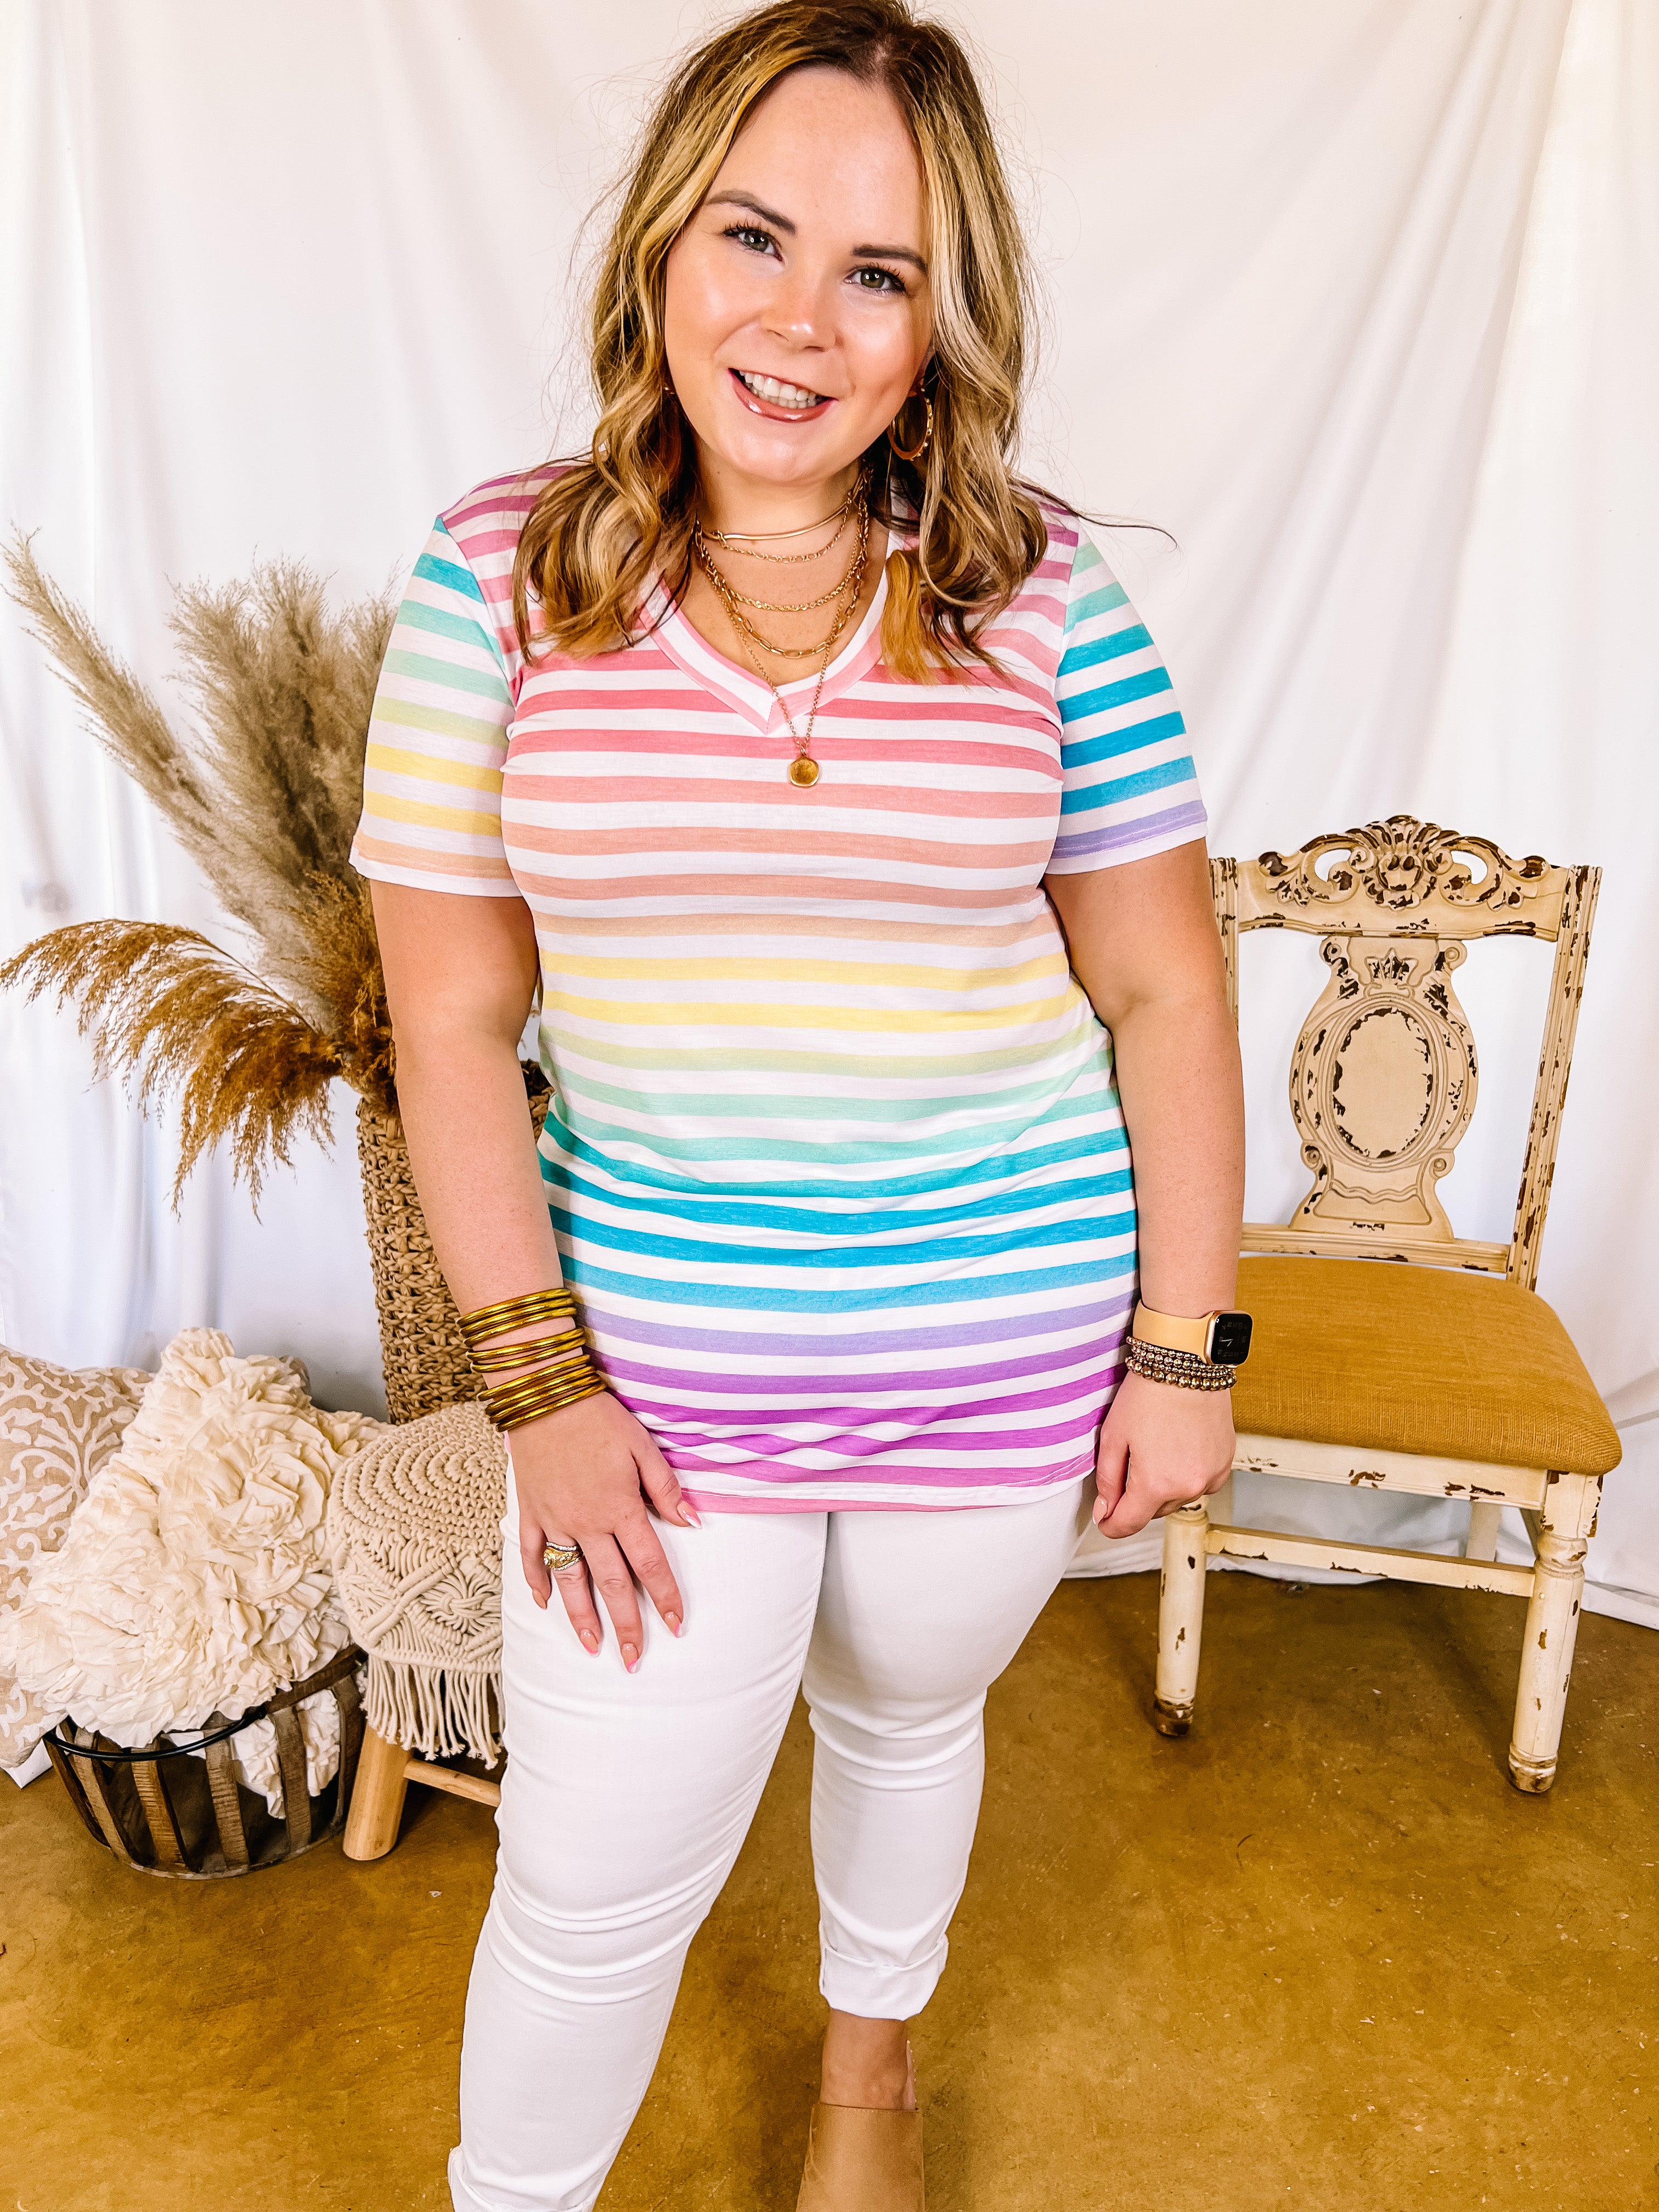 Last Chance Size Small & Med. | Keep Things Simple V Neck Multi Color Striped Short Sleeve Tee Shirt in White - Giddy Up Glamour Boutique